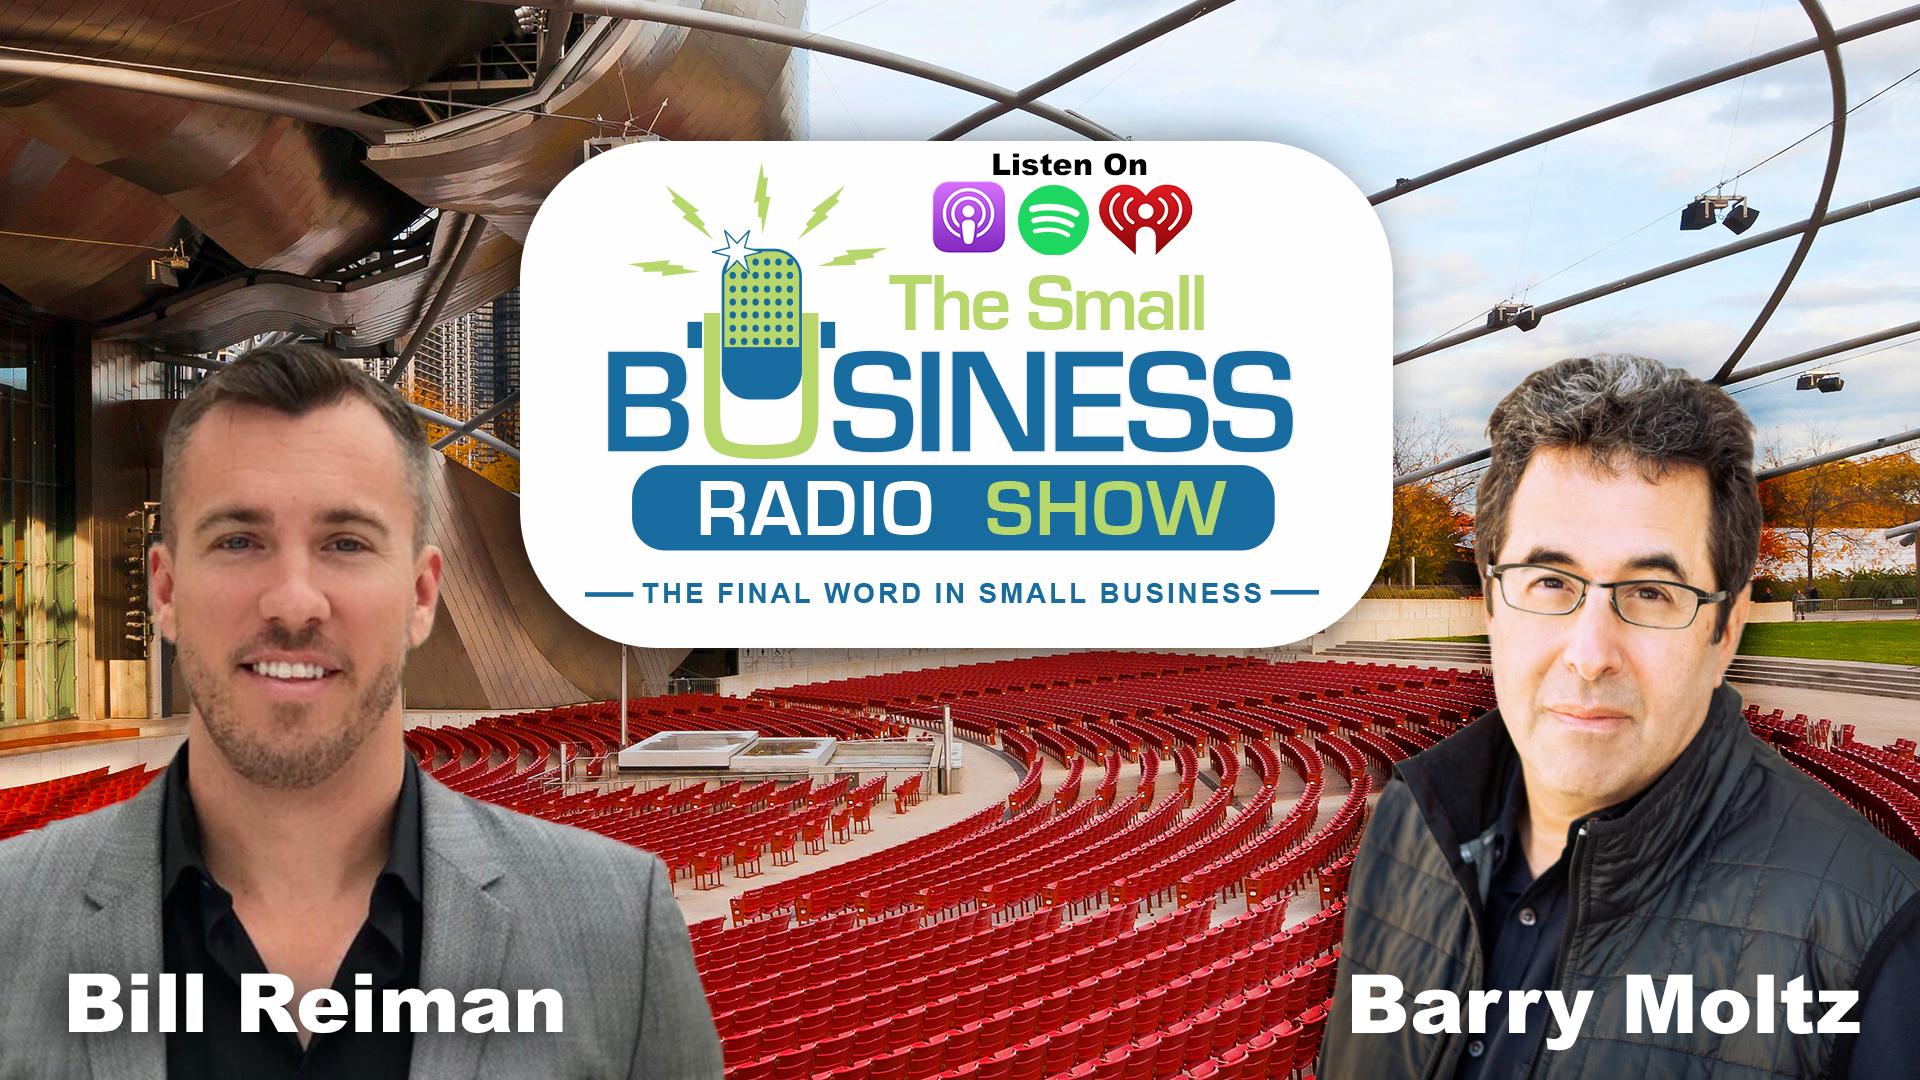 Bill Reiman on The Small Business Radio Show